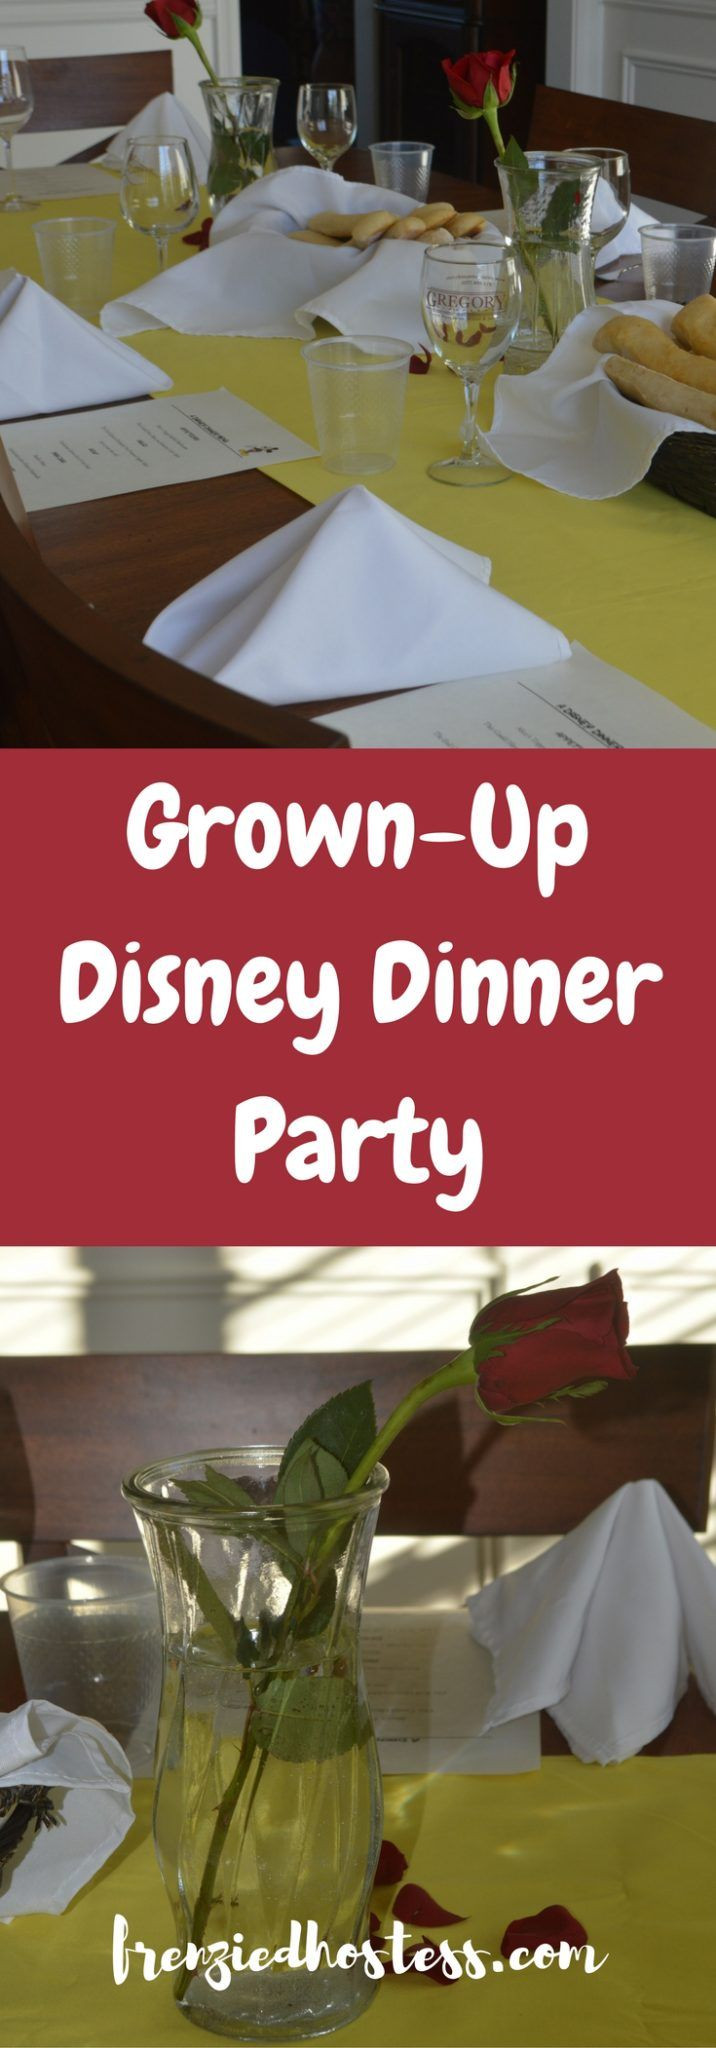 Themed Dinner Party Ideas For Adults
 How to Host a Fancy Disney Themed Dinner Party